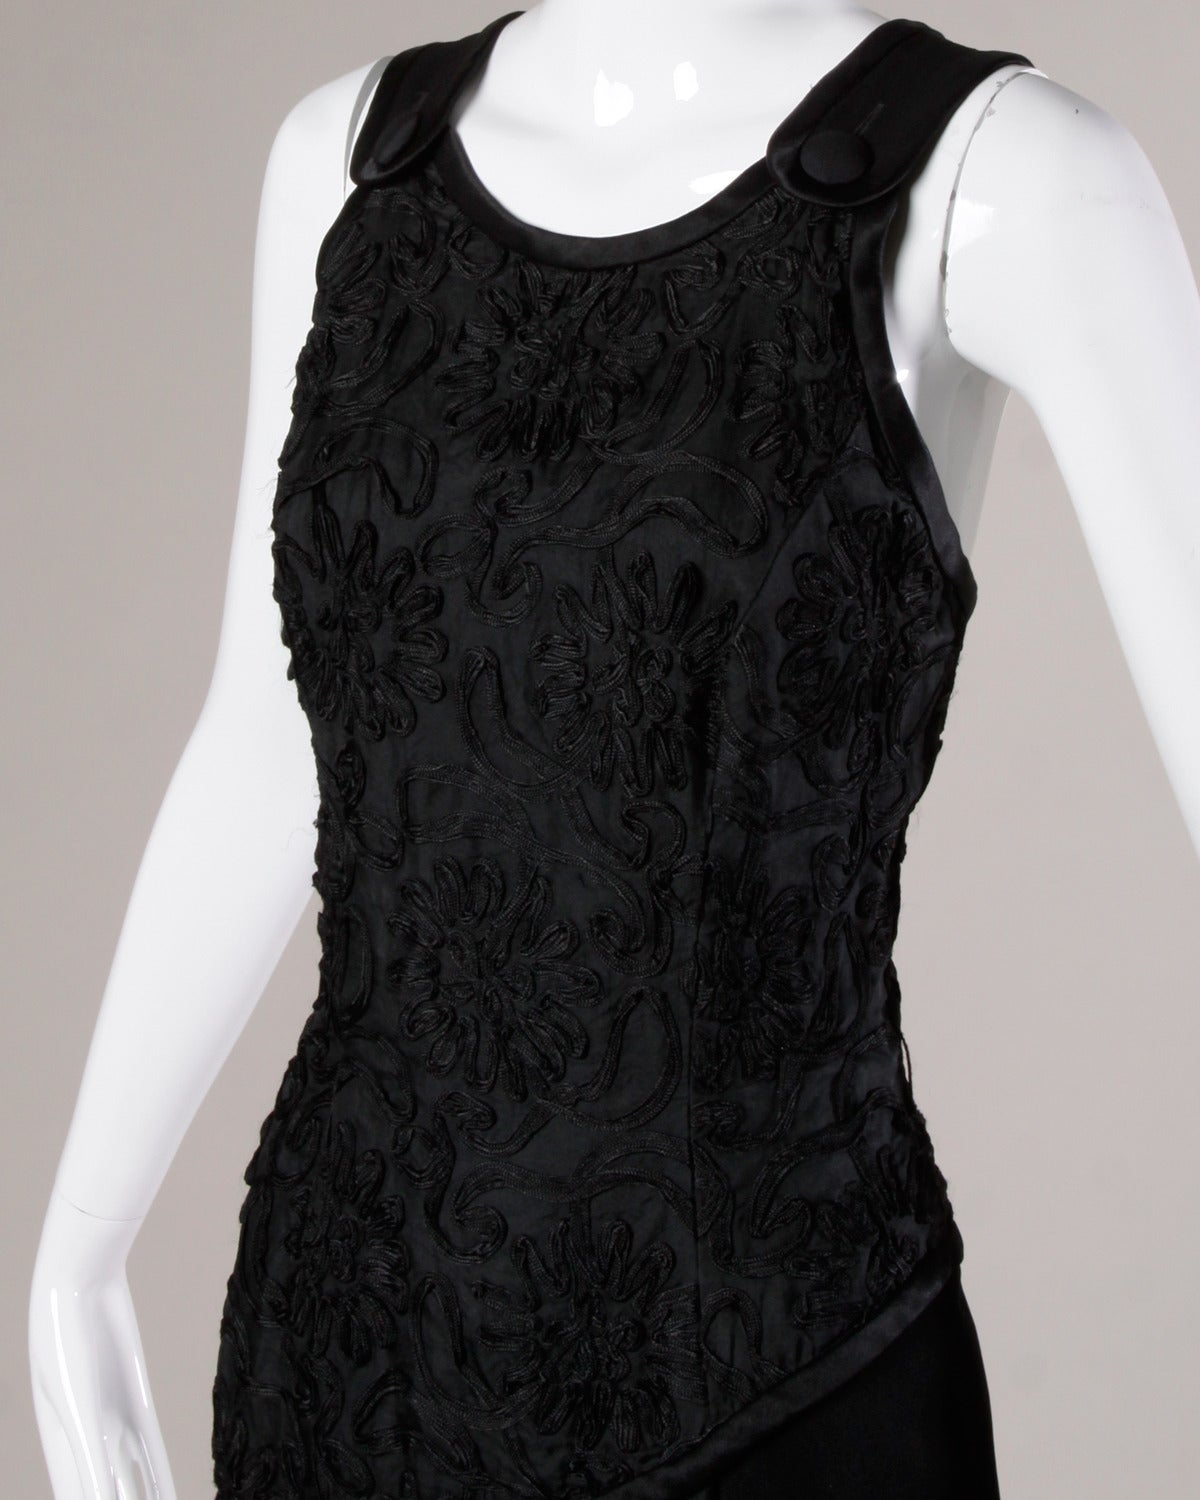 Bill Blass black evening dress with a soutache bodice and asymmetric front slit. 

Details:

Fully Lined
Side Zip Hook Closure/ Front Button Closure
Marked Size: 6
Estimated Size: Small
Color: Black
Fabric: Acetate/ Rayon/ Silk Trim
Label: